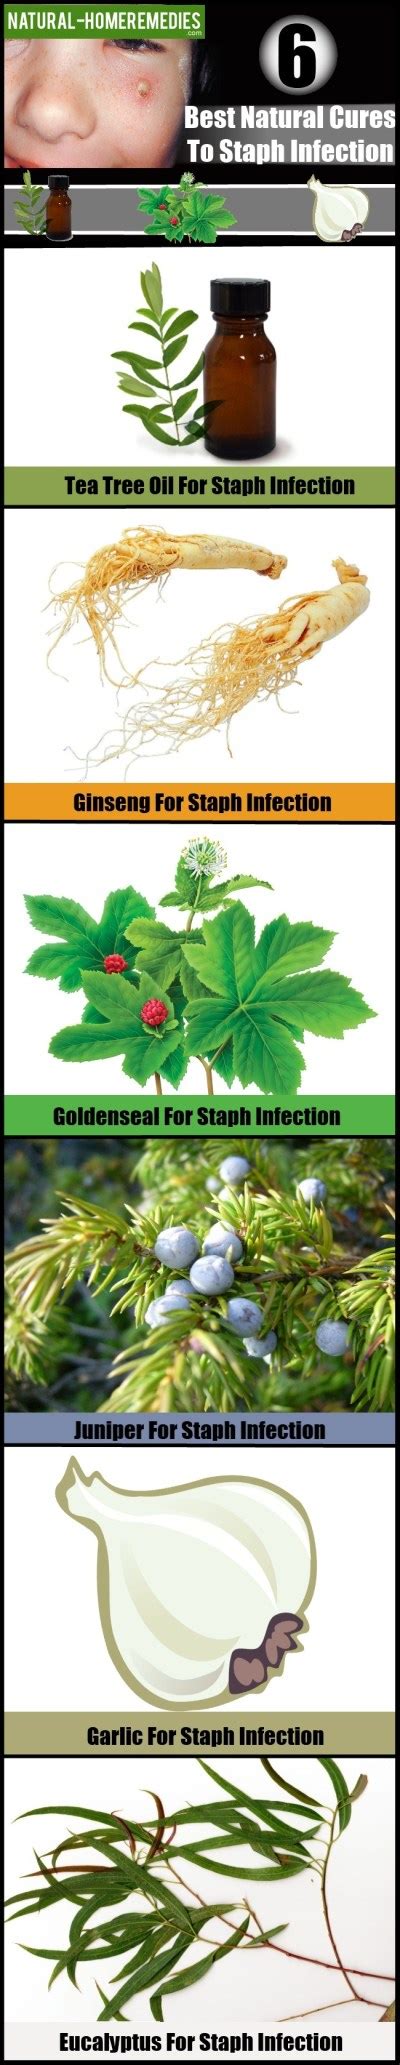 6 Best Natural Remedies For Staph Infection Natural Home Remedies